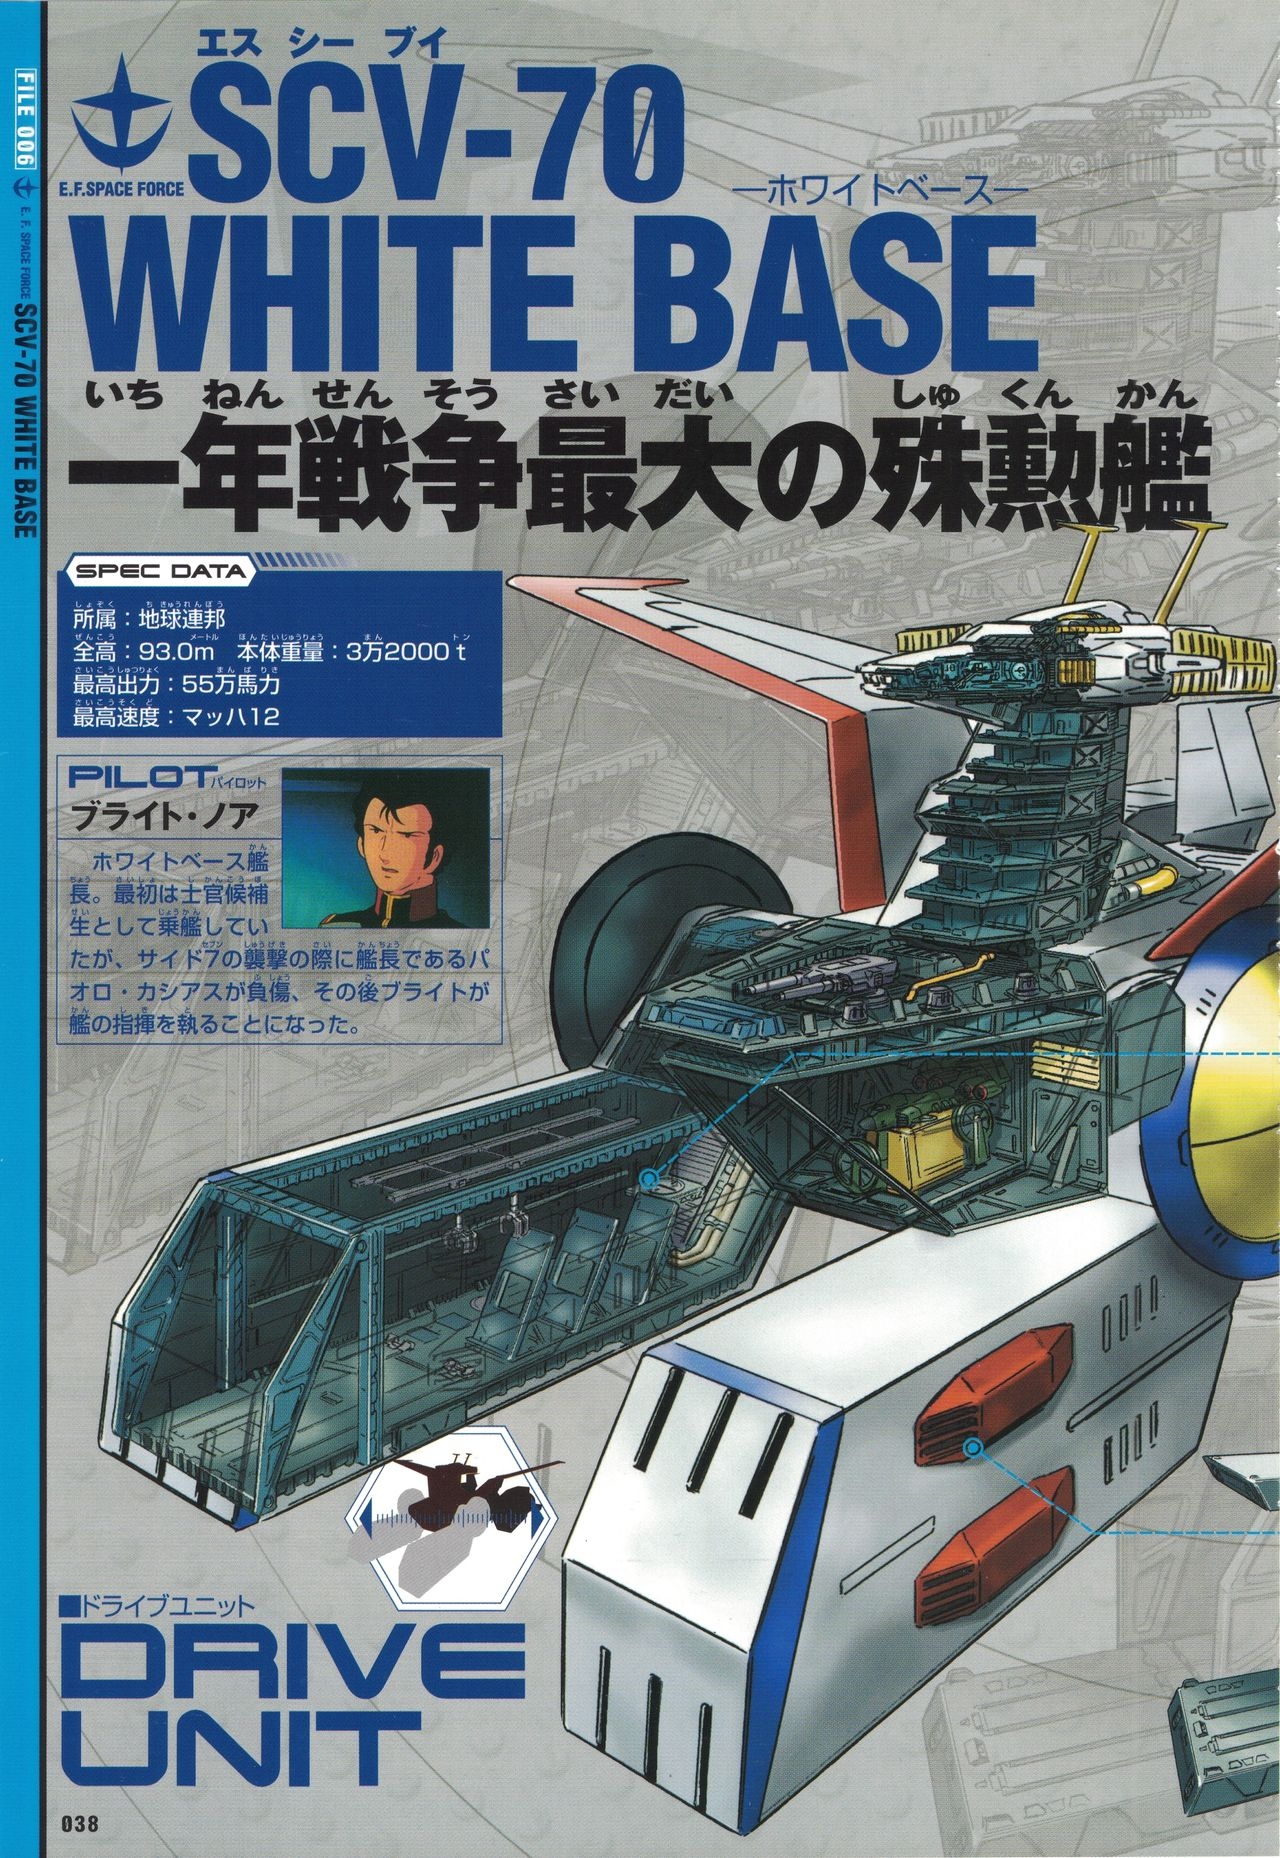 Mobile Suit Gundam - New Cross-Section Book - One Year War Edition 40